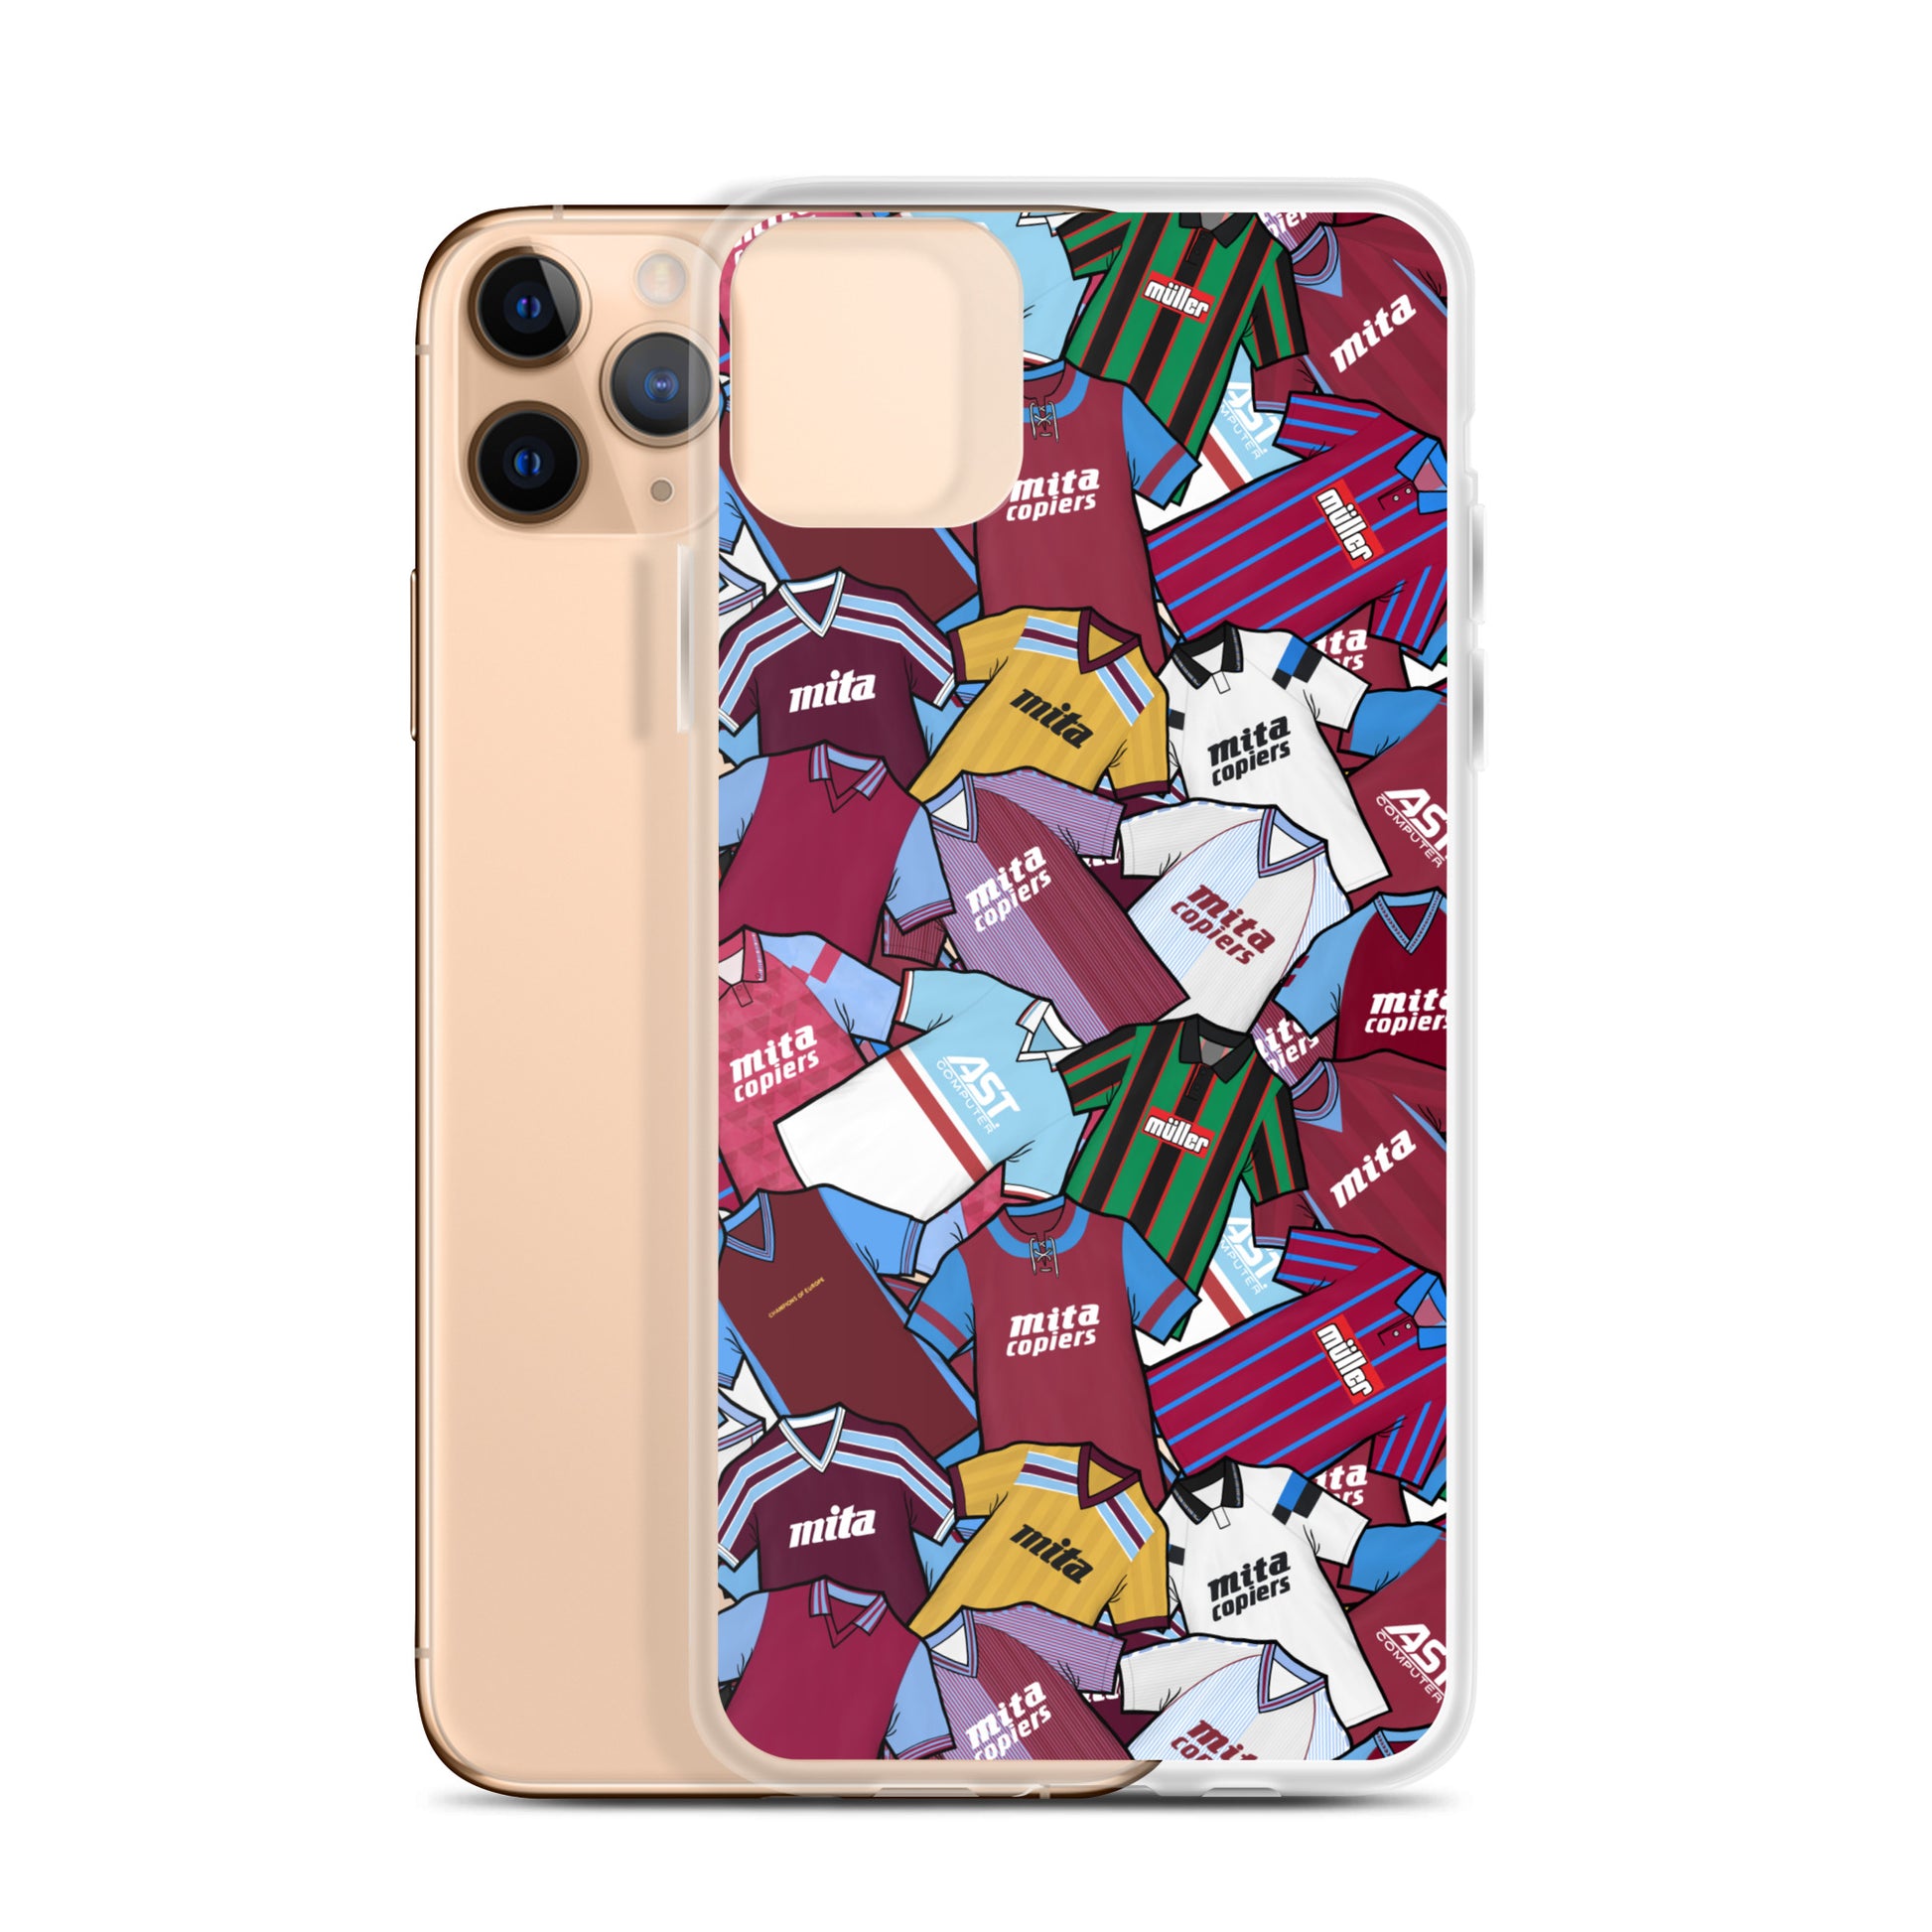 Unique and high-quality phone cases showcasing artwork of Aston Villa's retro jerseys. Stand out from the crowd with these stylish and nostalgic designs - perfect for any Villa fan looking to add a touch of retro flair to their phone